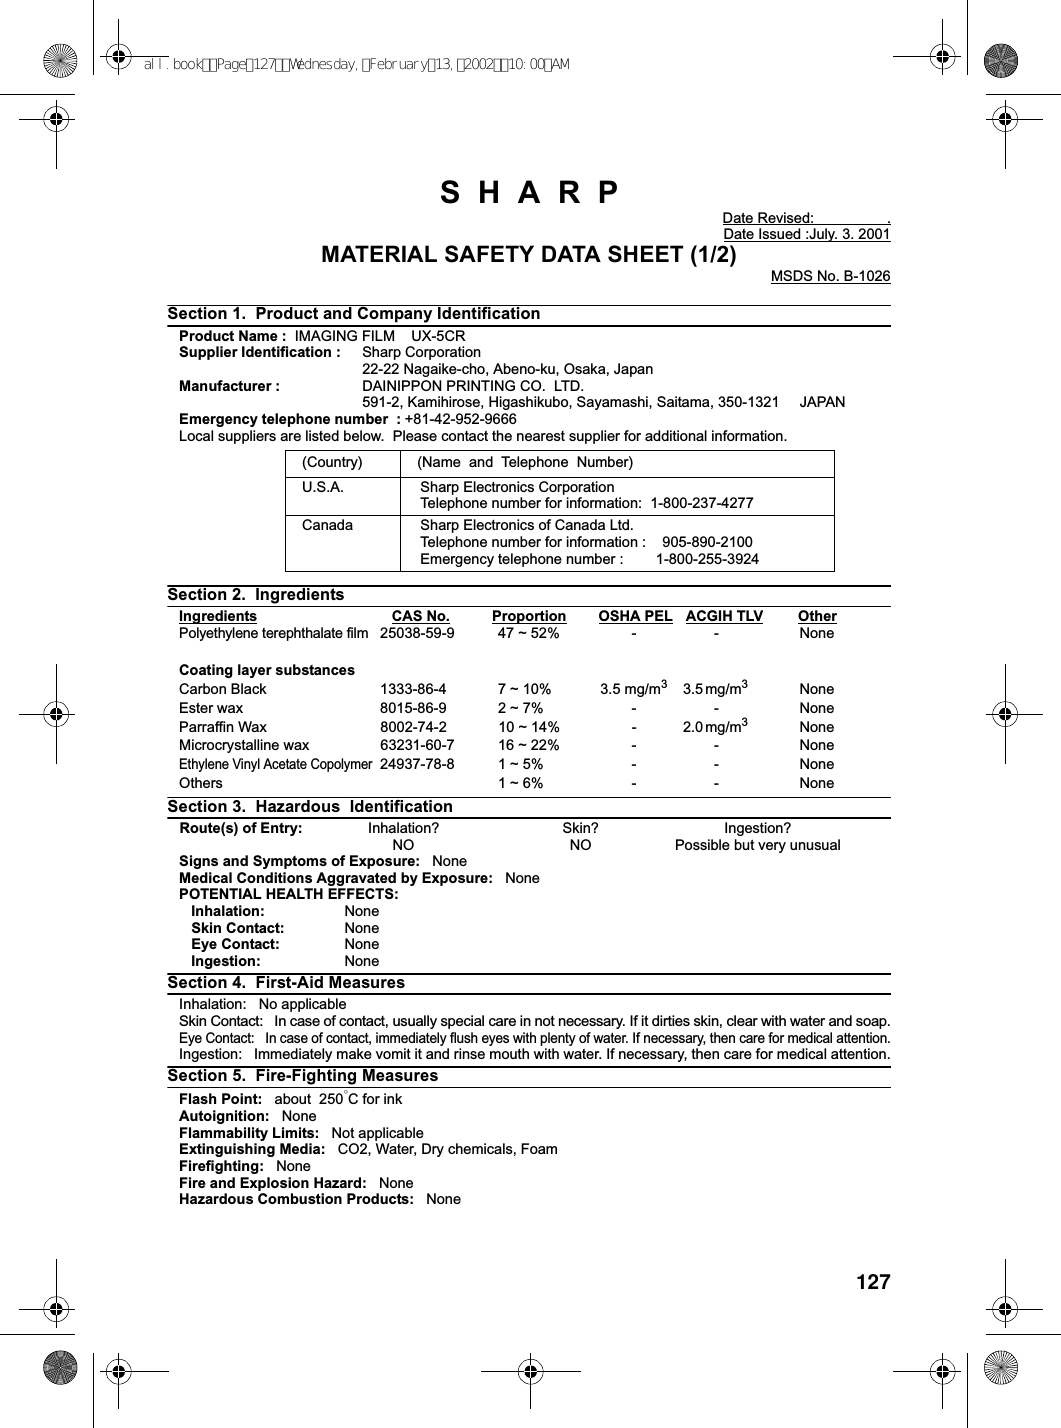 127SHARPDate Revised: .Date Issued :July. 3. 2001MATERIAL SAFETY DATA SHEET (1/2)MSDS No. B-1026Section 1. Product and Company IdentificationProduct Name : IMAGING FILM UX-5CRSupplier Identification : Sharp Corporation22-22 Nagaike-cho, Abeno-ku, Osaka, JapanManufacturer : DAINIPPON PRINTING CO. LTD.591-2, Kamihirose, Higashikubo, Sayamashi, Saitama, 350-1321 JAPANEmergency telephone number : +81-42-952-9666Local suppliers are listed below. Please contact the nearest supplier for additional information.Section 2. IngredientsIngredients CAS No. Proportion OSHA PEL ACGIH TLV OtherPolyethylene terephthalate film25038-59-9 47 ~ 52% - - NoneCoating layer substancesCarbon Black 1333-86-4 7 ~ 10% 3.5 mg/m33.5 mg/m3NoneEster wax 8015-86-9 2 ~ 7% - - NoneParraffin Wax 8002-74-2 10 ~ 14% - 2.0 mg/m3NoneMicrocrystalline wax 63231-60-7 16 ~ 22% - - NoneEthylene Vinyl Acetate Copolymer24937-78-8 1 ~ 5% - - NoneOthers 1 ~ 6% - - NoneSection 3. Hazardous IdentificationRoute(s) of Entry: Inhalation? Skin? Ingestion?NO NO Possible but very unusualSigns and Symptoms of Exposure: NoneMedical Conditions Aggravated by Exposure: NonePOTENTIAL HEALTH EFFECTS:Inhalation: NoneSkin Contact: NoneEye Contact: NoneIngestion: NoneSection 4. First-Aid MeasuresInhalation: No applicableSkin Contact: In case of contact, usually special care in not necessary. If it dirties skin, clear with water and soap.Eye Contact: In case of contact, immediately flush eyes with plenty of water. If necessary, then care for medical attention.Ingestion: Immediately make vomit it and rinse mouth with water. If necessary, then care for medical attention.Section 5. Fire-Fighting MeasuresFlash Point: about 250°CforinkAutoignition: NoneFlammability Limits: Not applicableExtinguishing Media: CO2, Water, Dry chemicals, FoamFirefighting: NoneFire and Explosion Hazard: NoneHazardous Combustion Products: None(Country) (Name and Telephone Number)U.S.A. Sharp Electronics CorporationTelephone number for information: 1-800-237-4277Canada Sharp Electronics of Canada Ltd.Telephone number for information : 905-890-2100Emergency telephone number : 1-800-255-3924all.bookPage127Wednesday,February13,200210:00AM